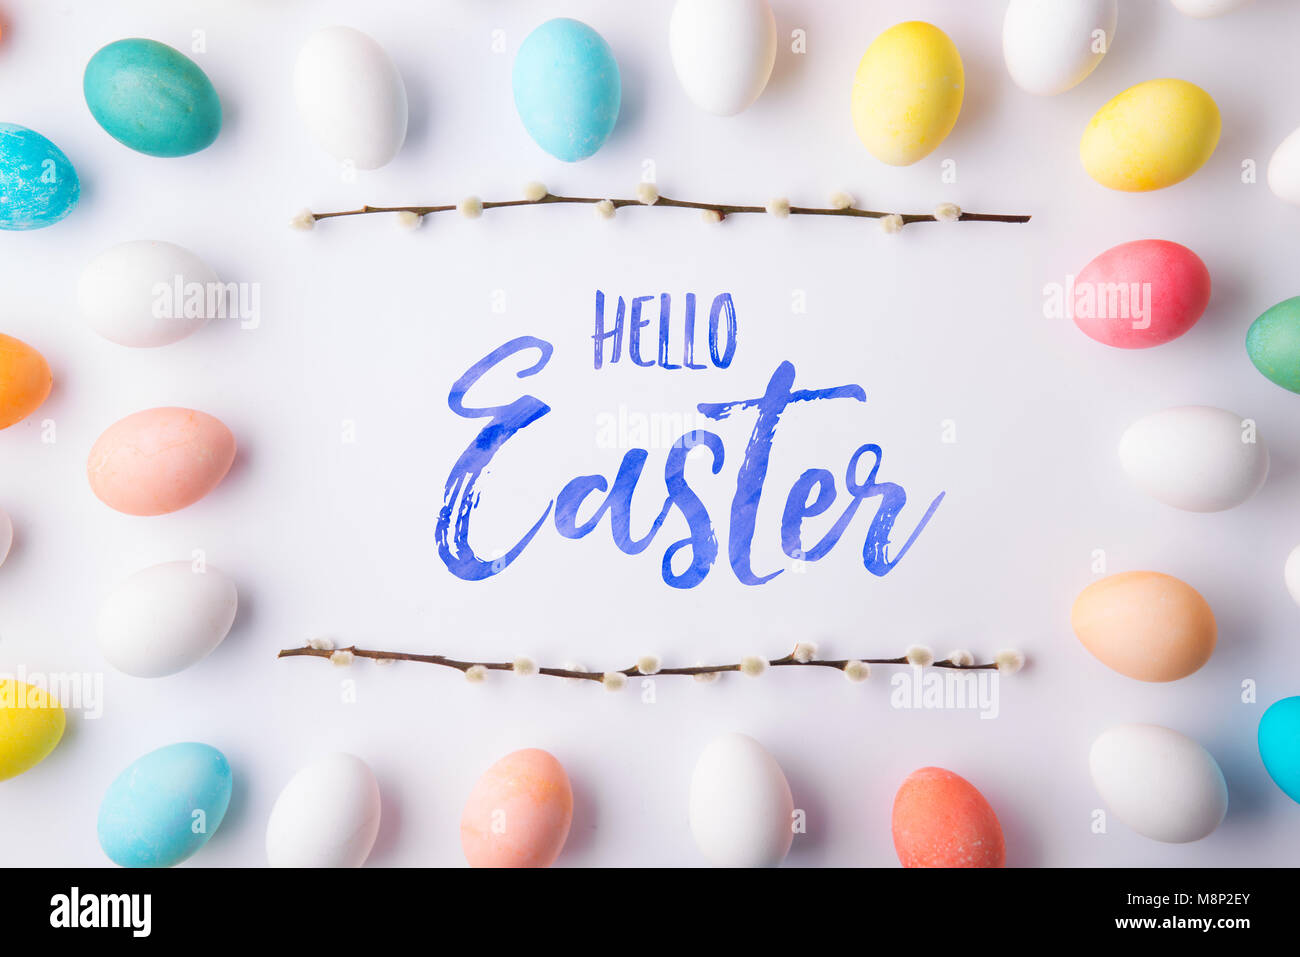 Hello Easter flat lay on a white background. Stock Photo